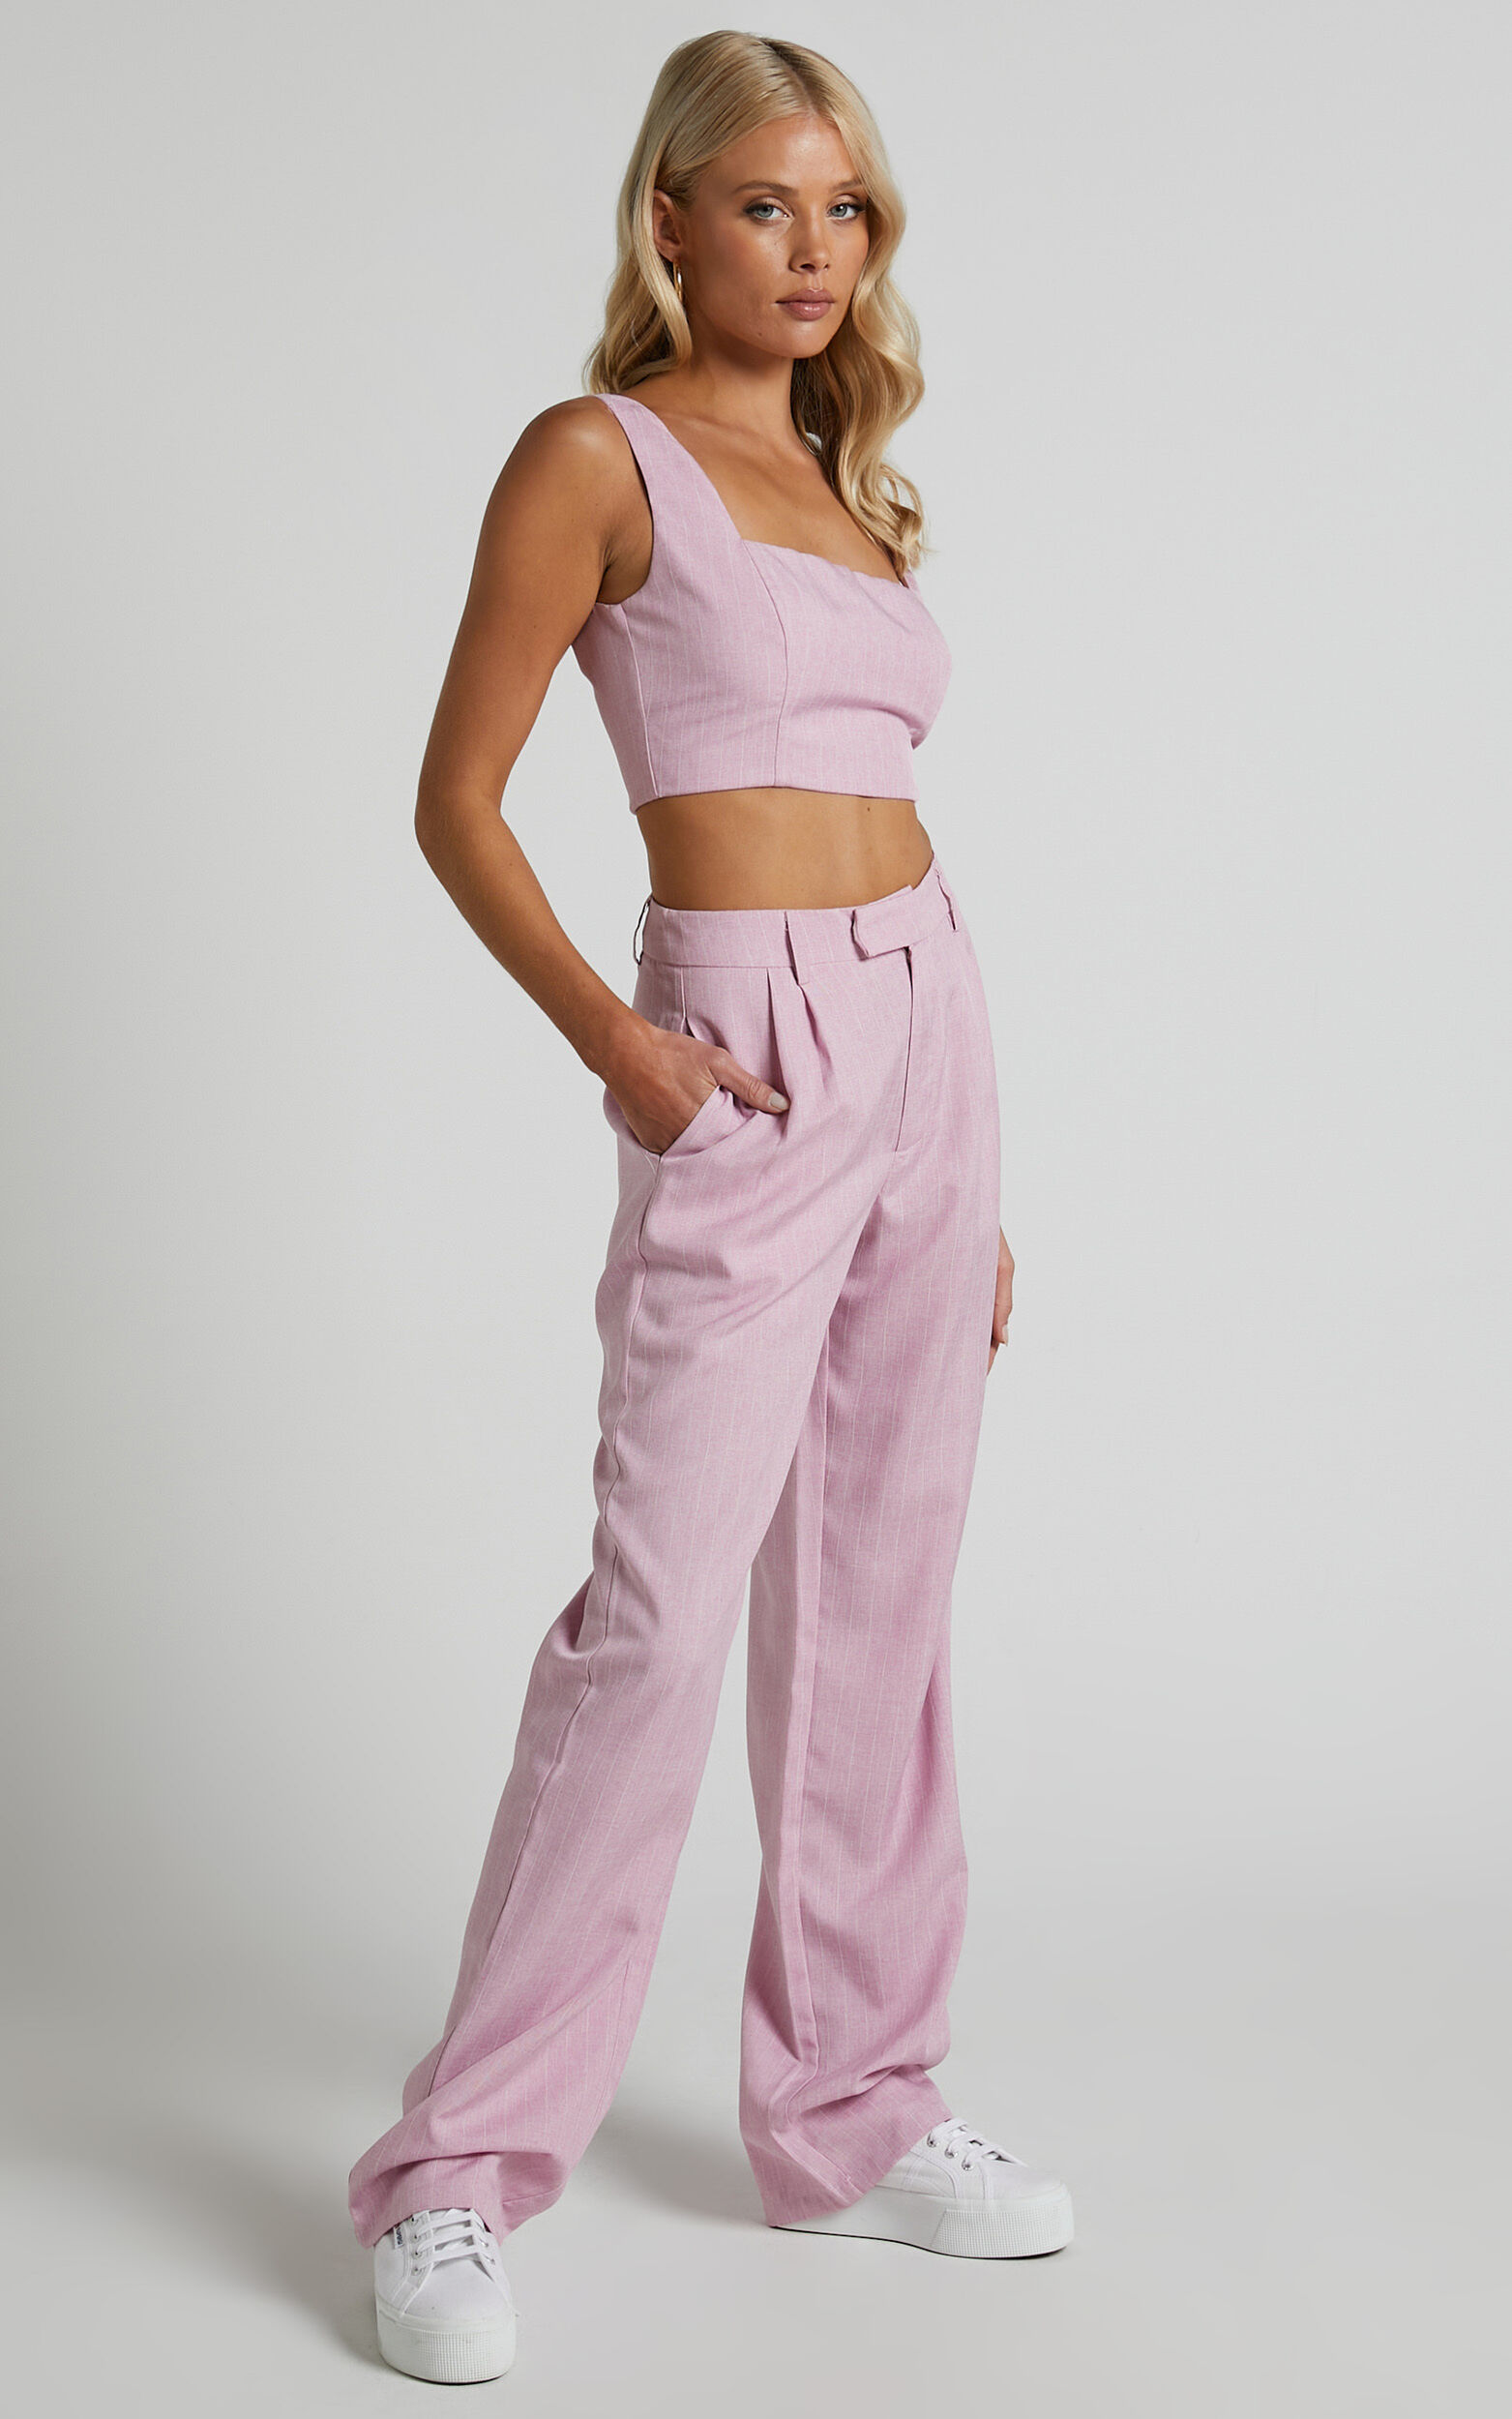 Marvilla Two Piece Set - Crop Top and Tailored Pants Set in Light